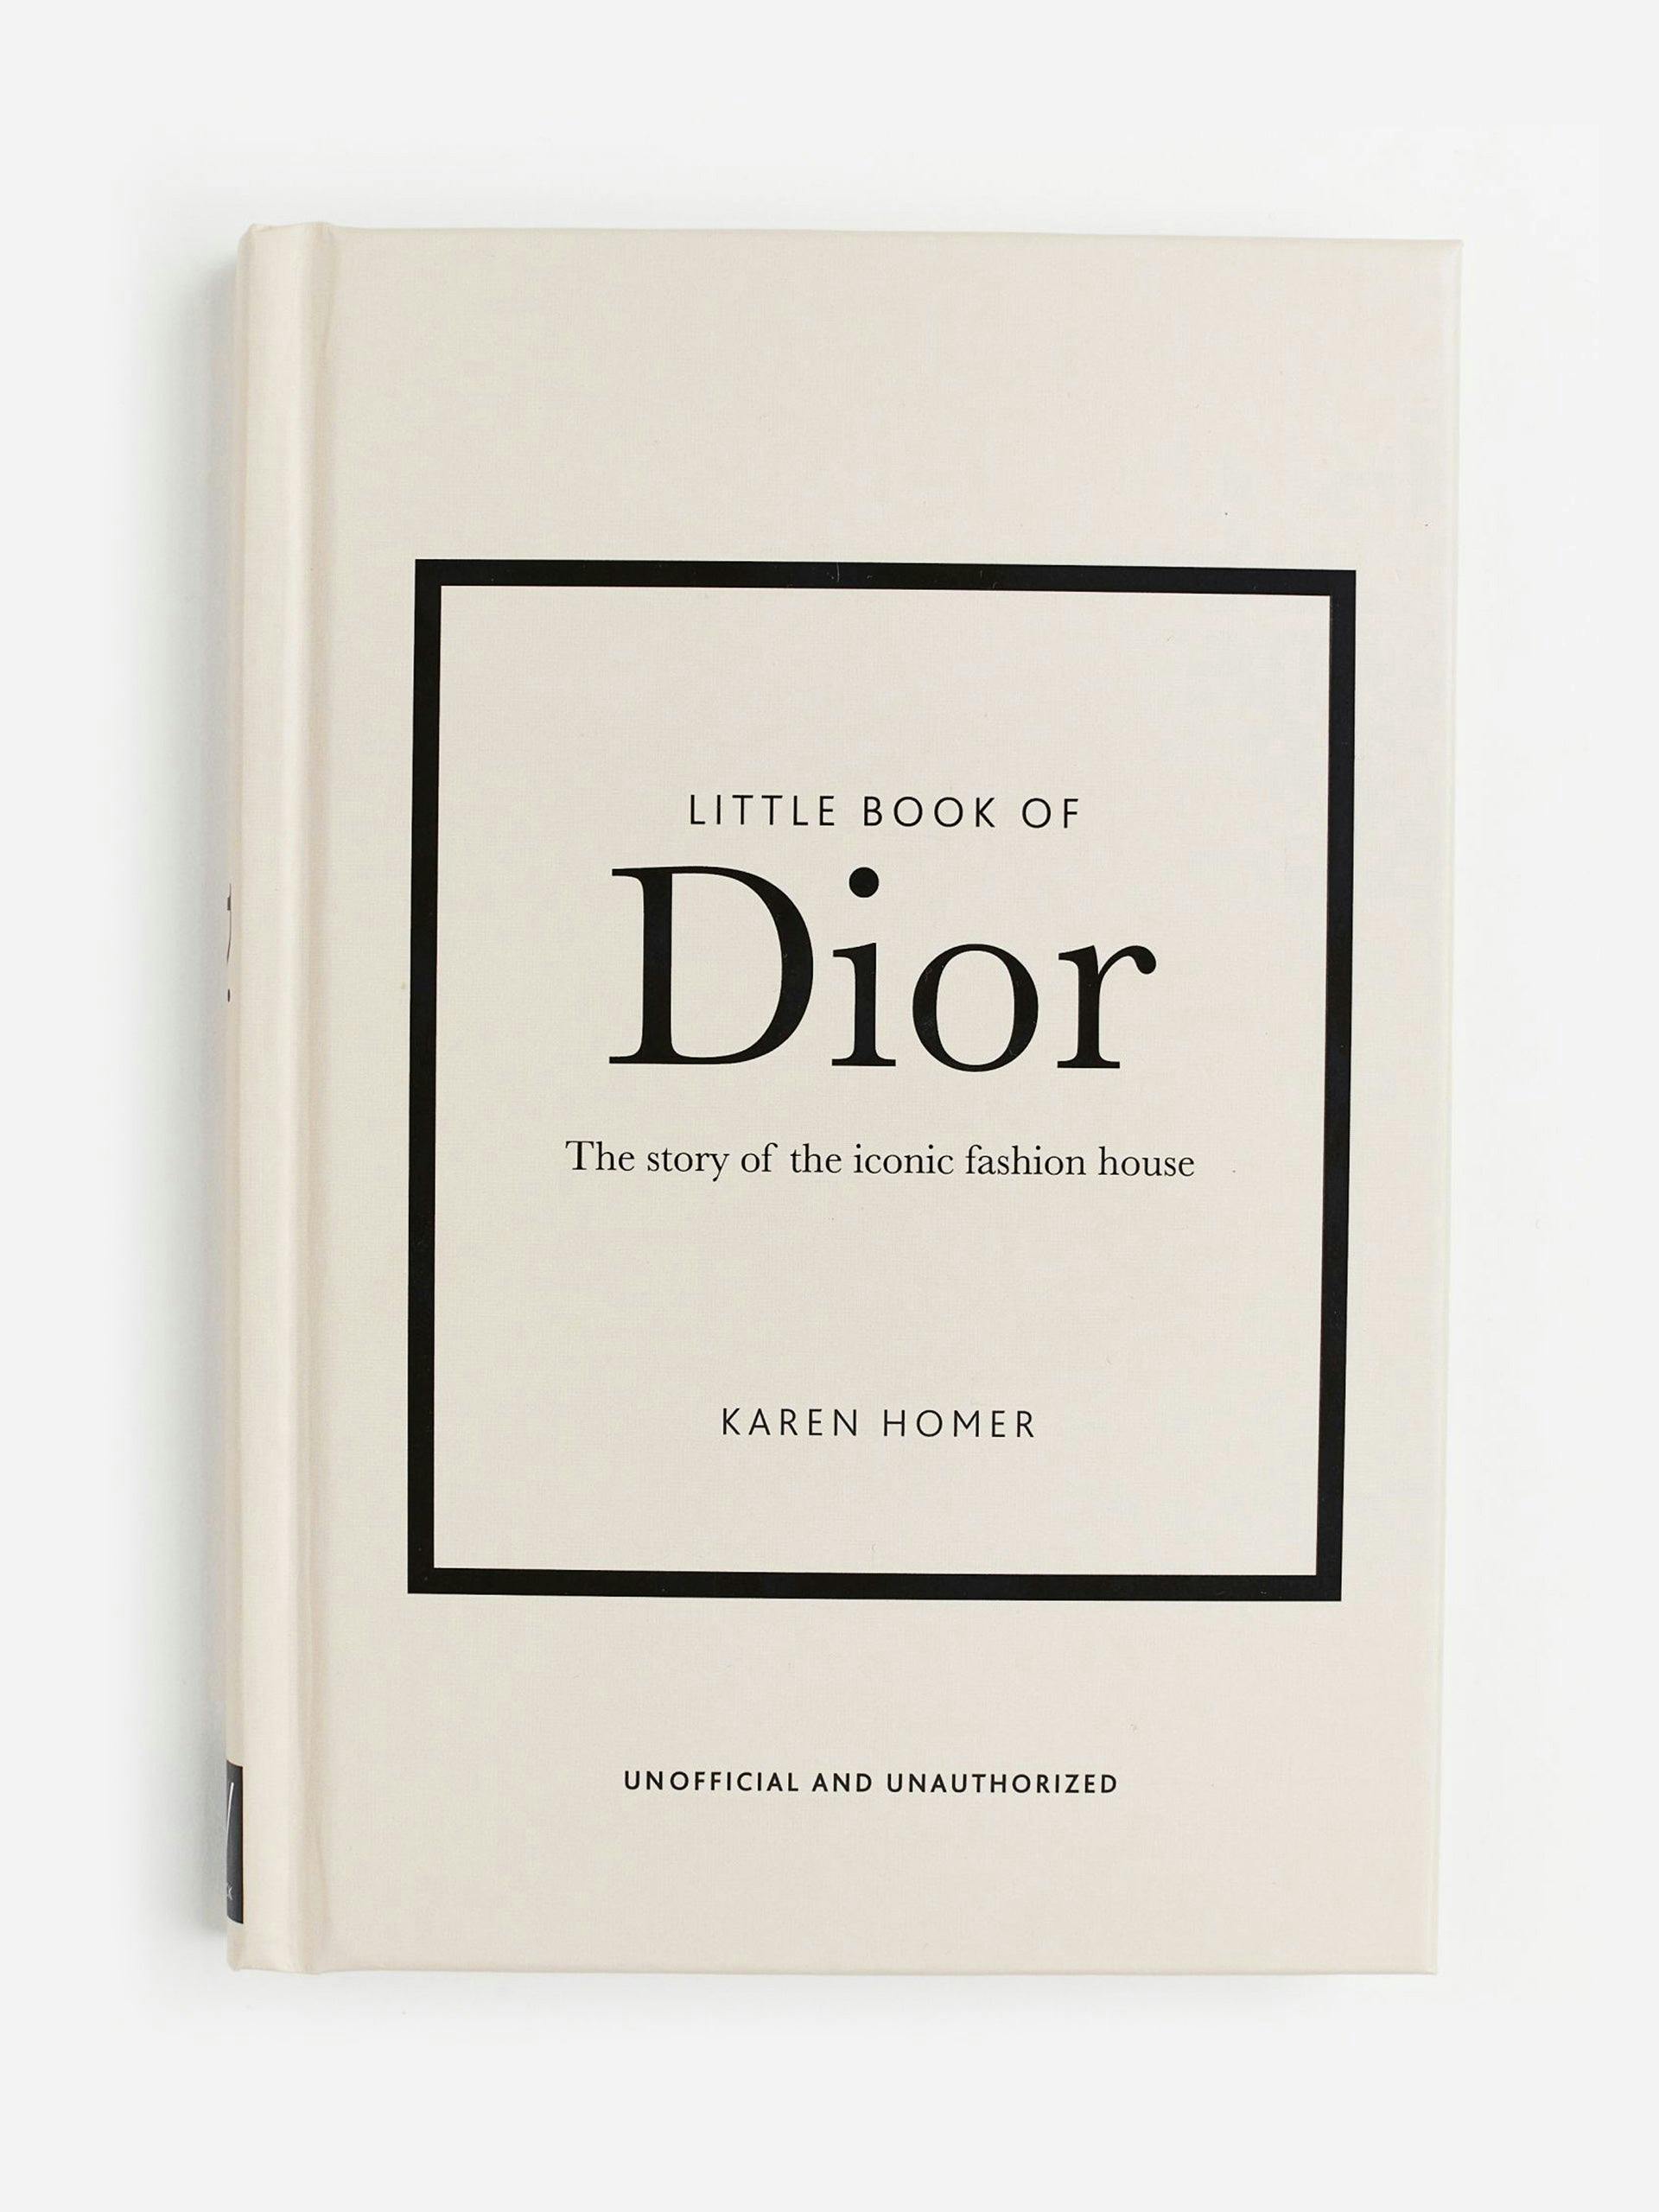 Little book of Dior'